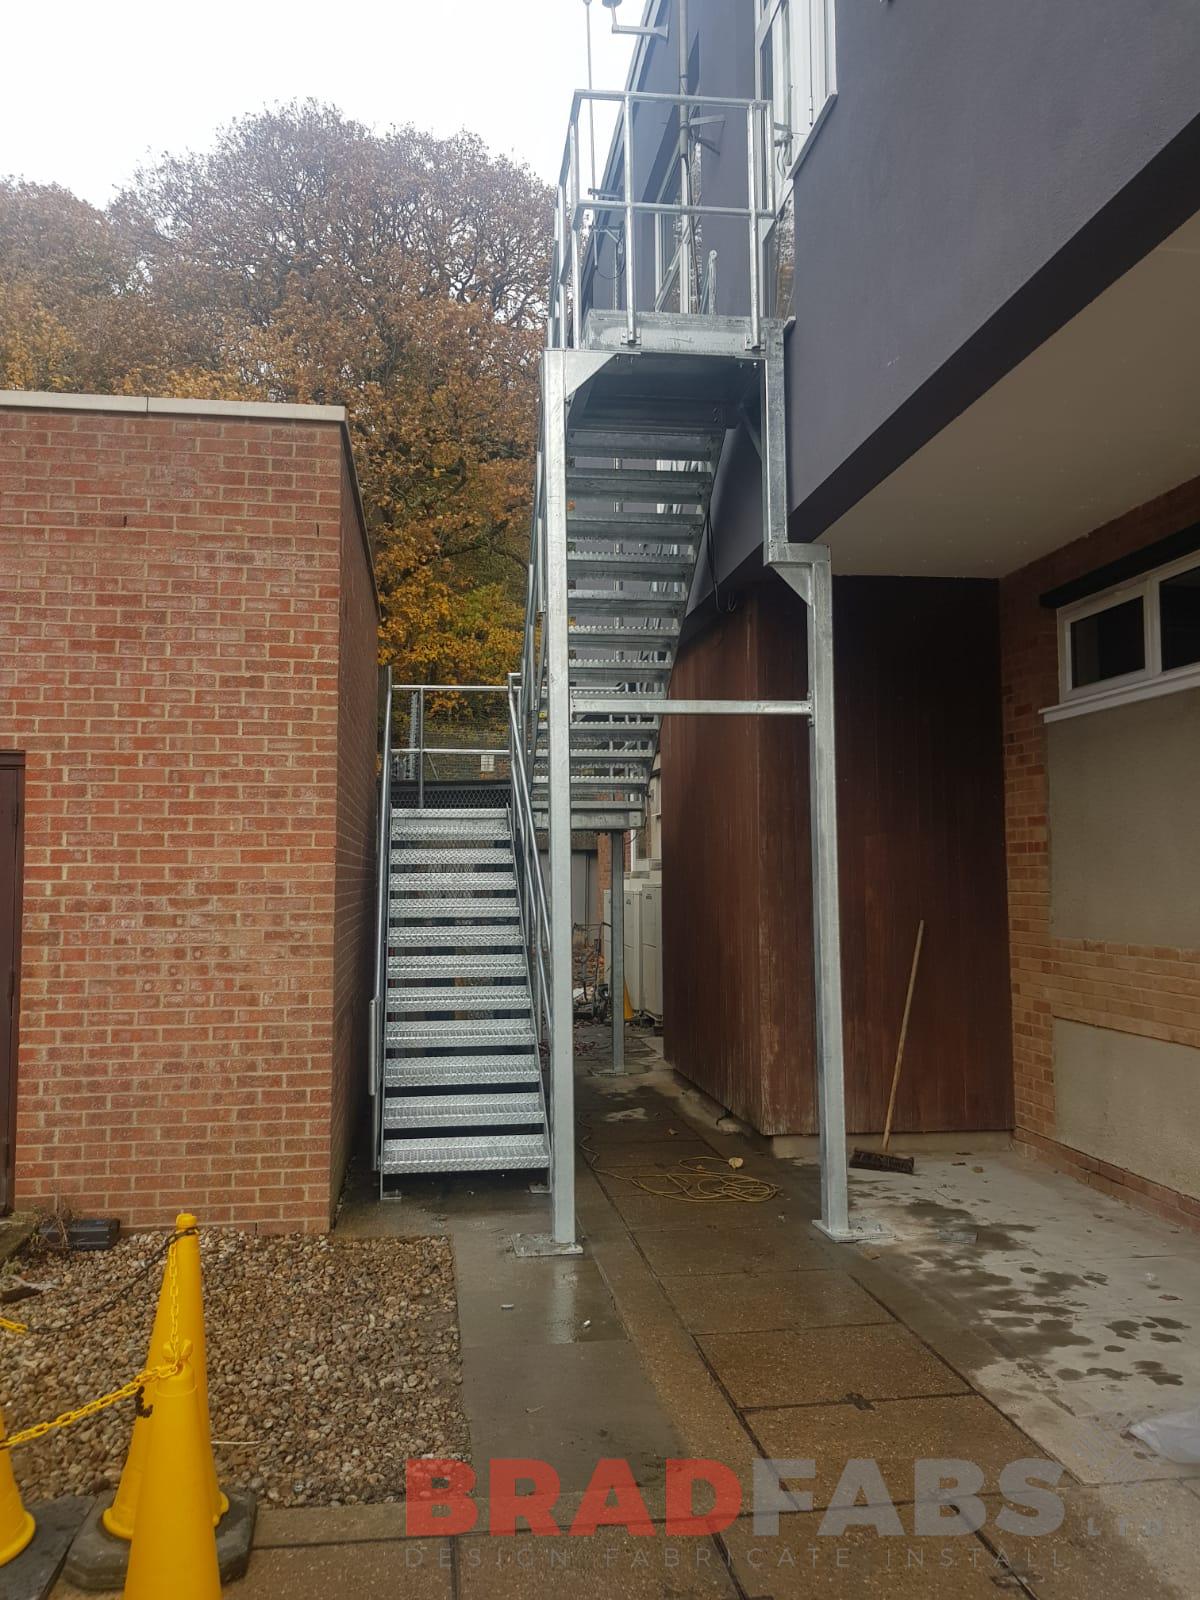 Mild steel and galvanised commercial fire escape staircase by Bradfabs